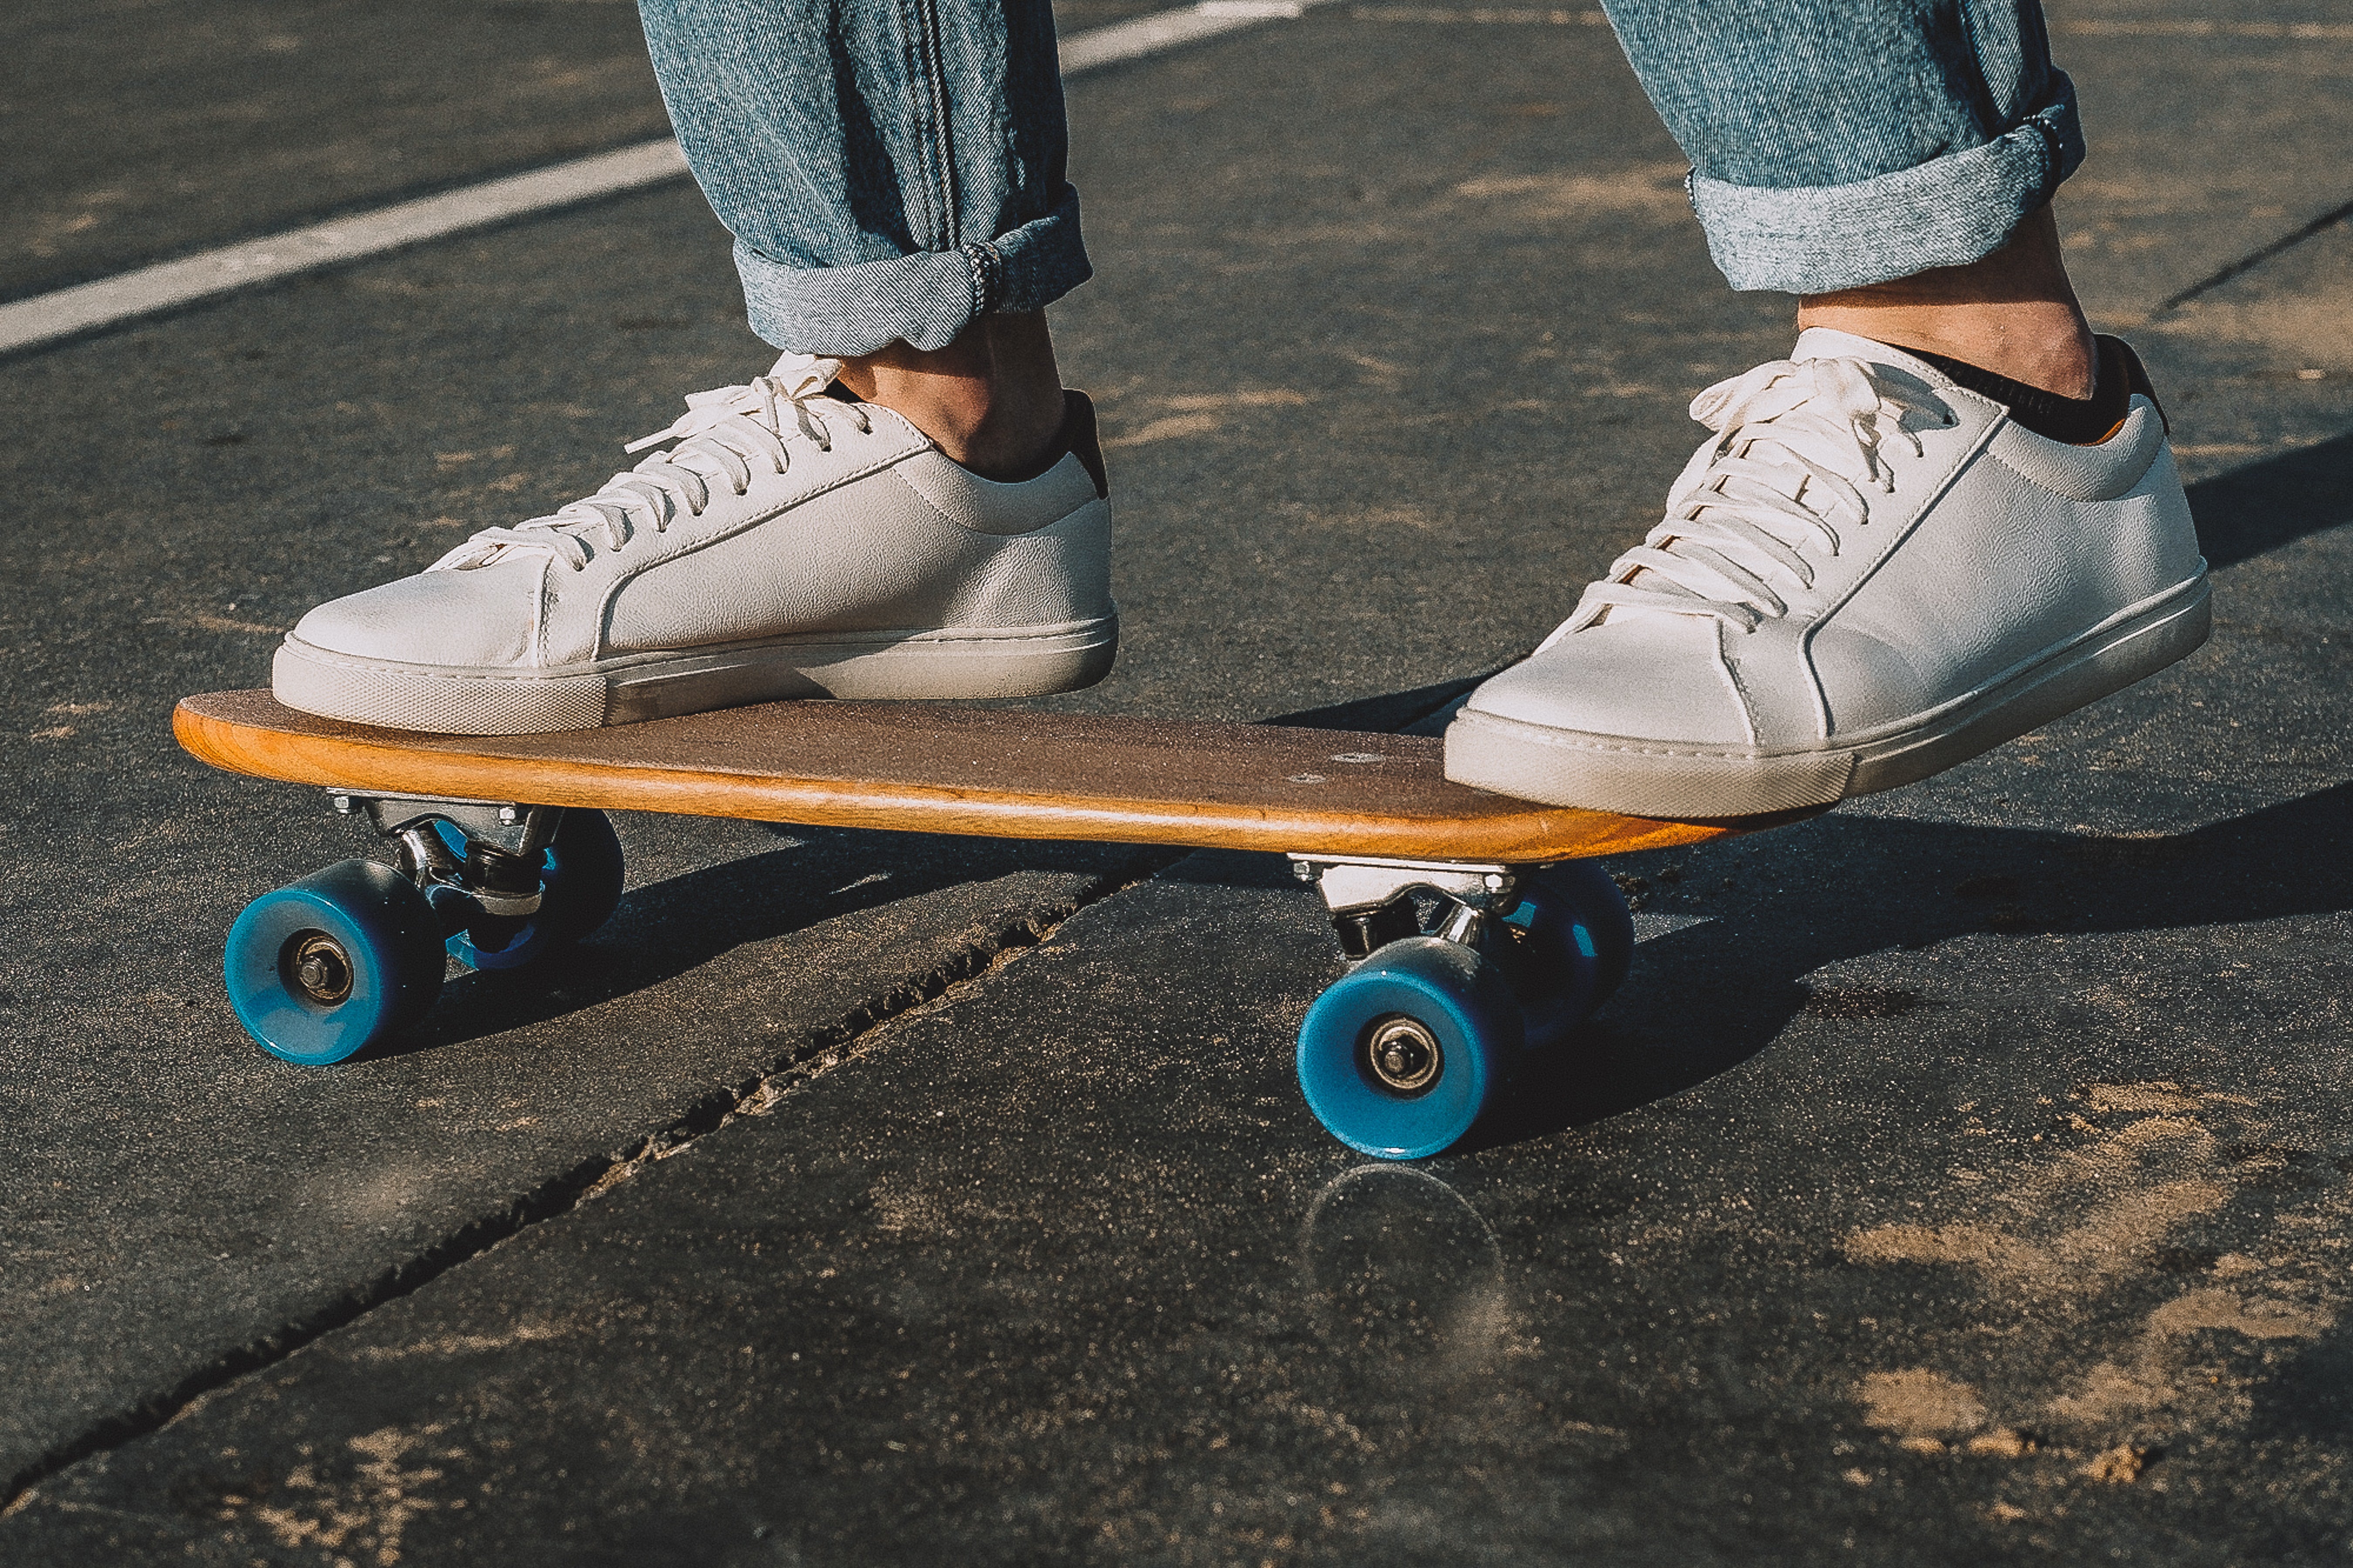 Top 10 Wide Skate Shoes, A Guide for Skaters WIth Wide Feet